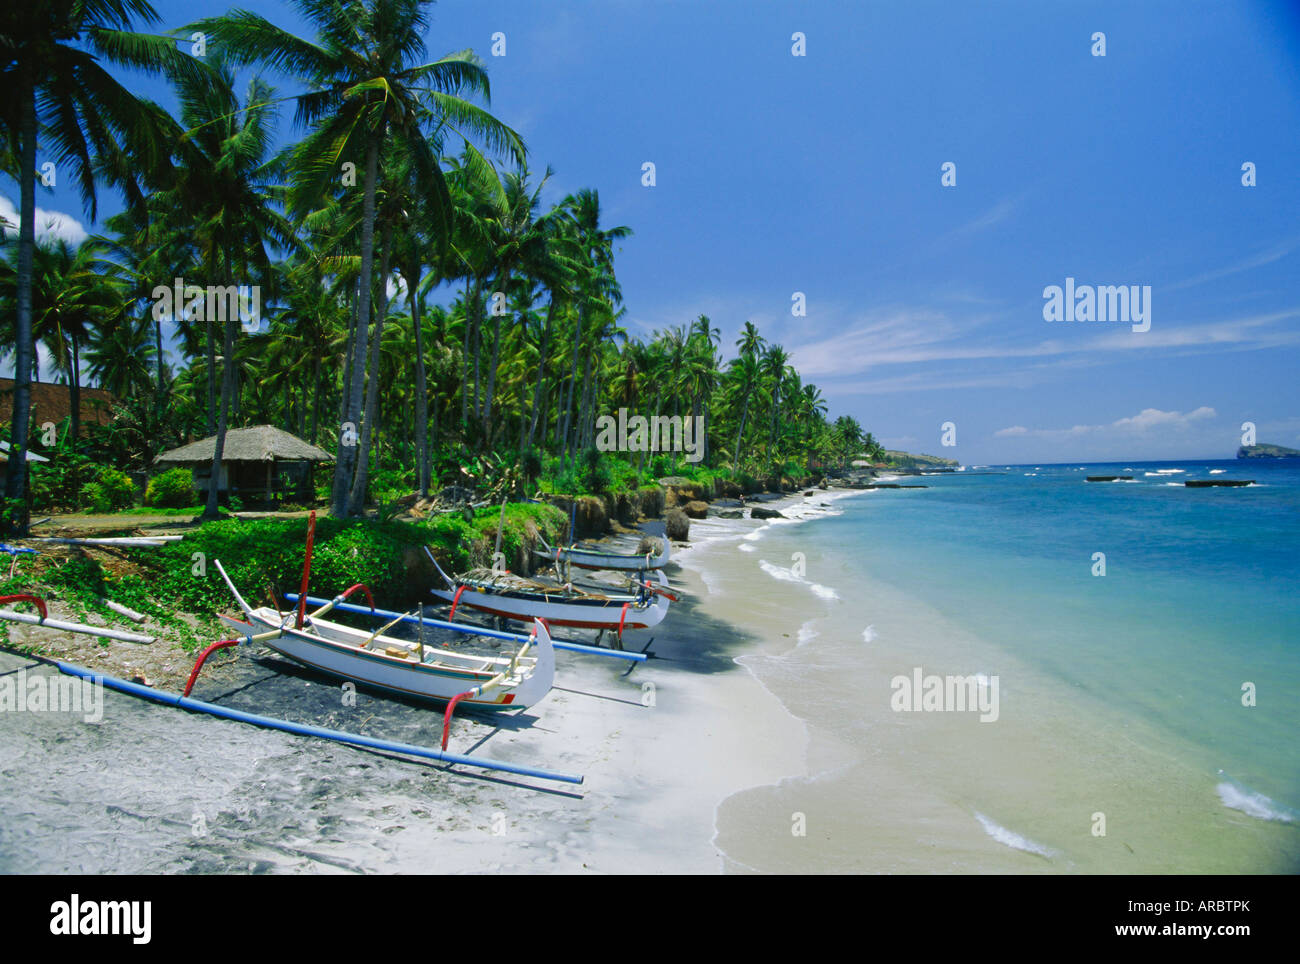 The beach at Candidasa, popular east coast resort which has lost a lot of sand to erosion, Bali, Indonesia, Asia Stock Photo